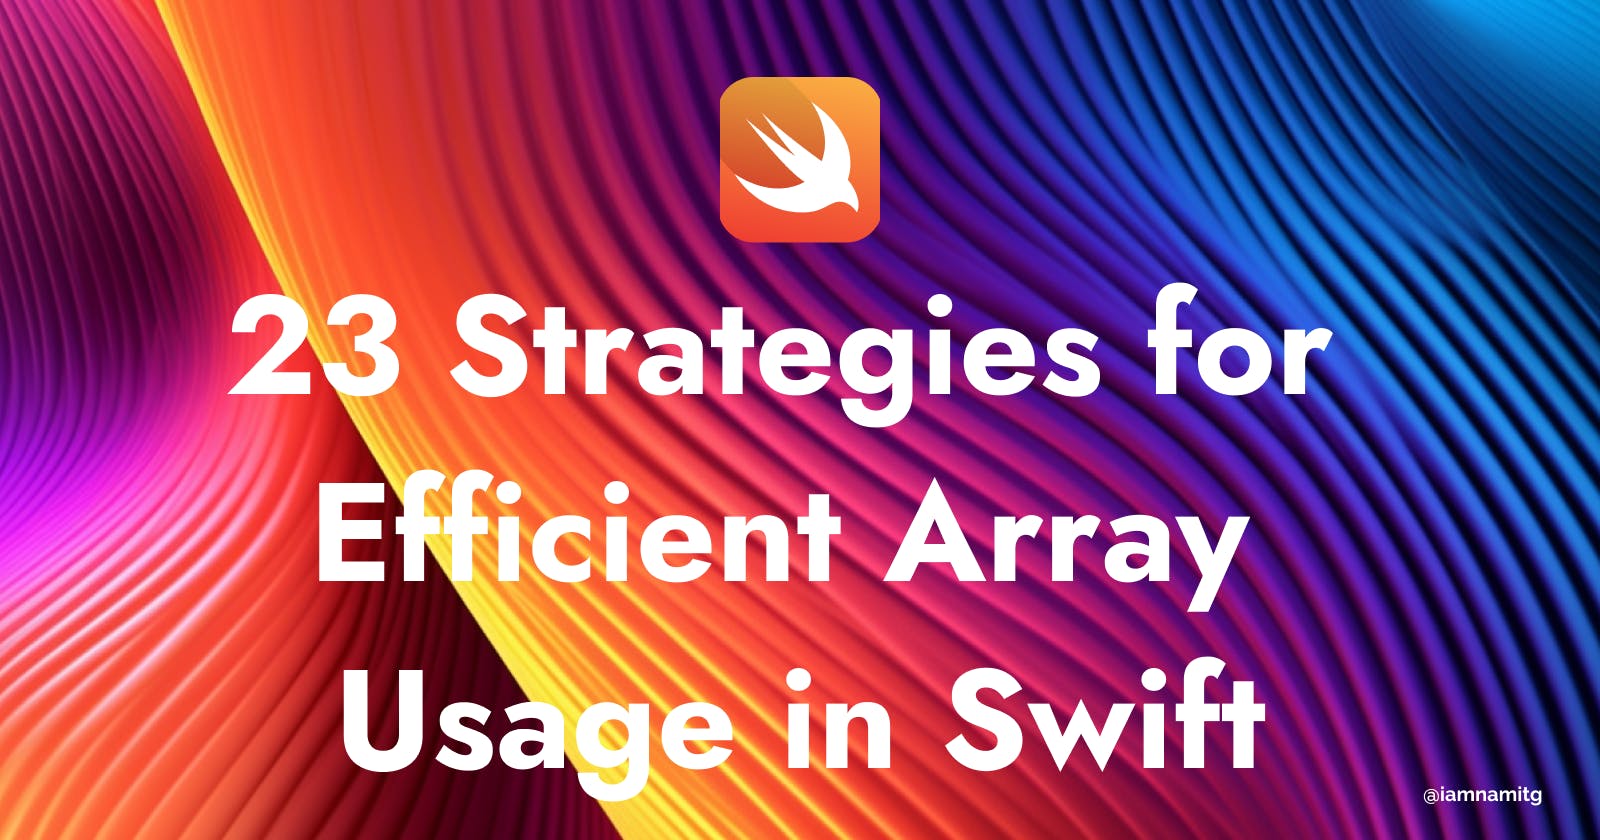 23 Strategies for Efficient Array Usage in Swift